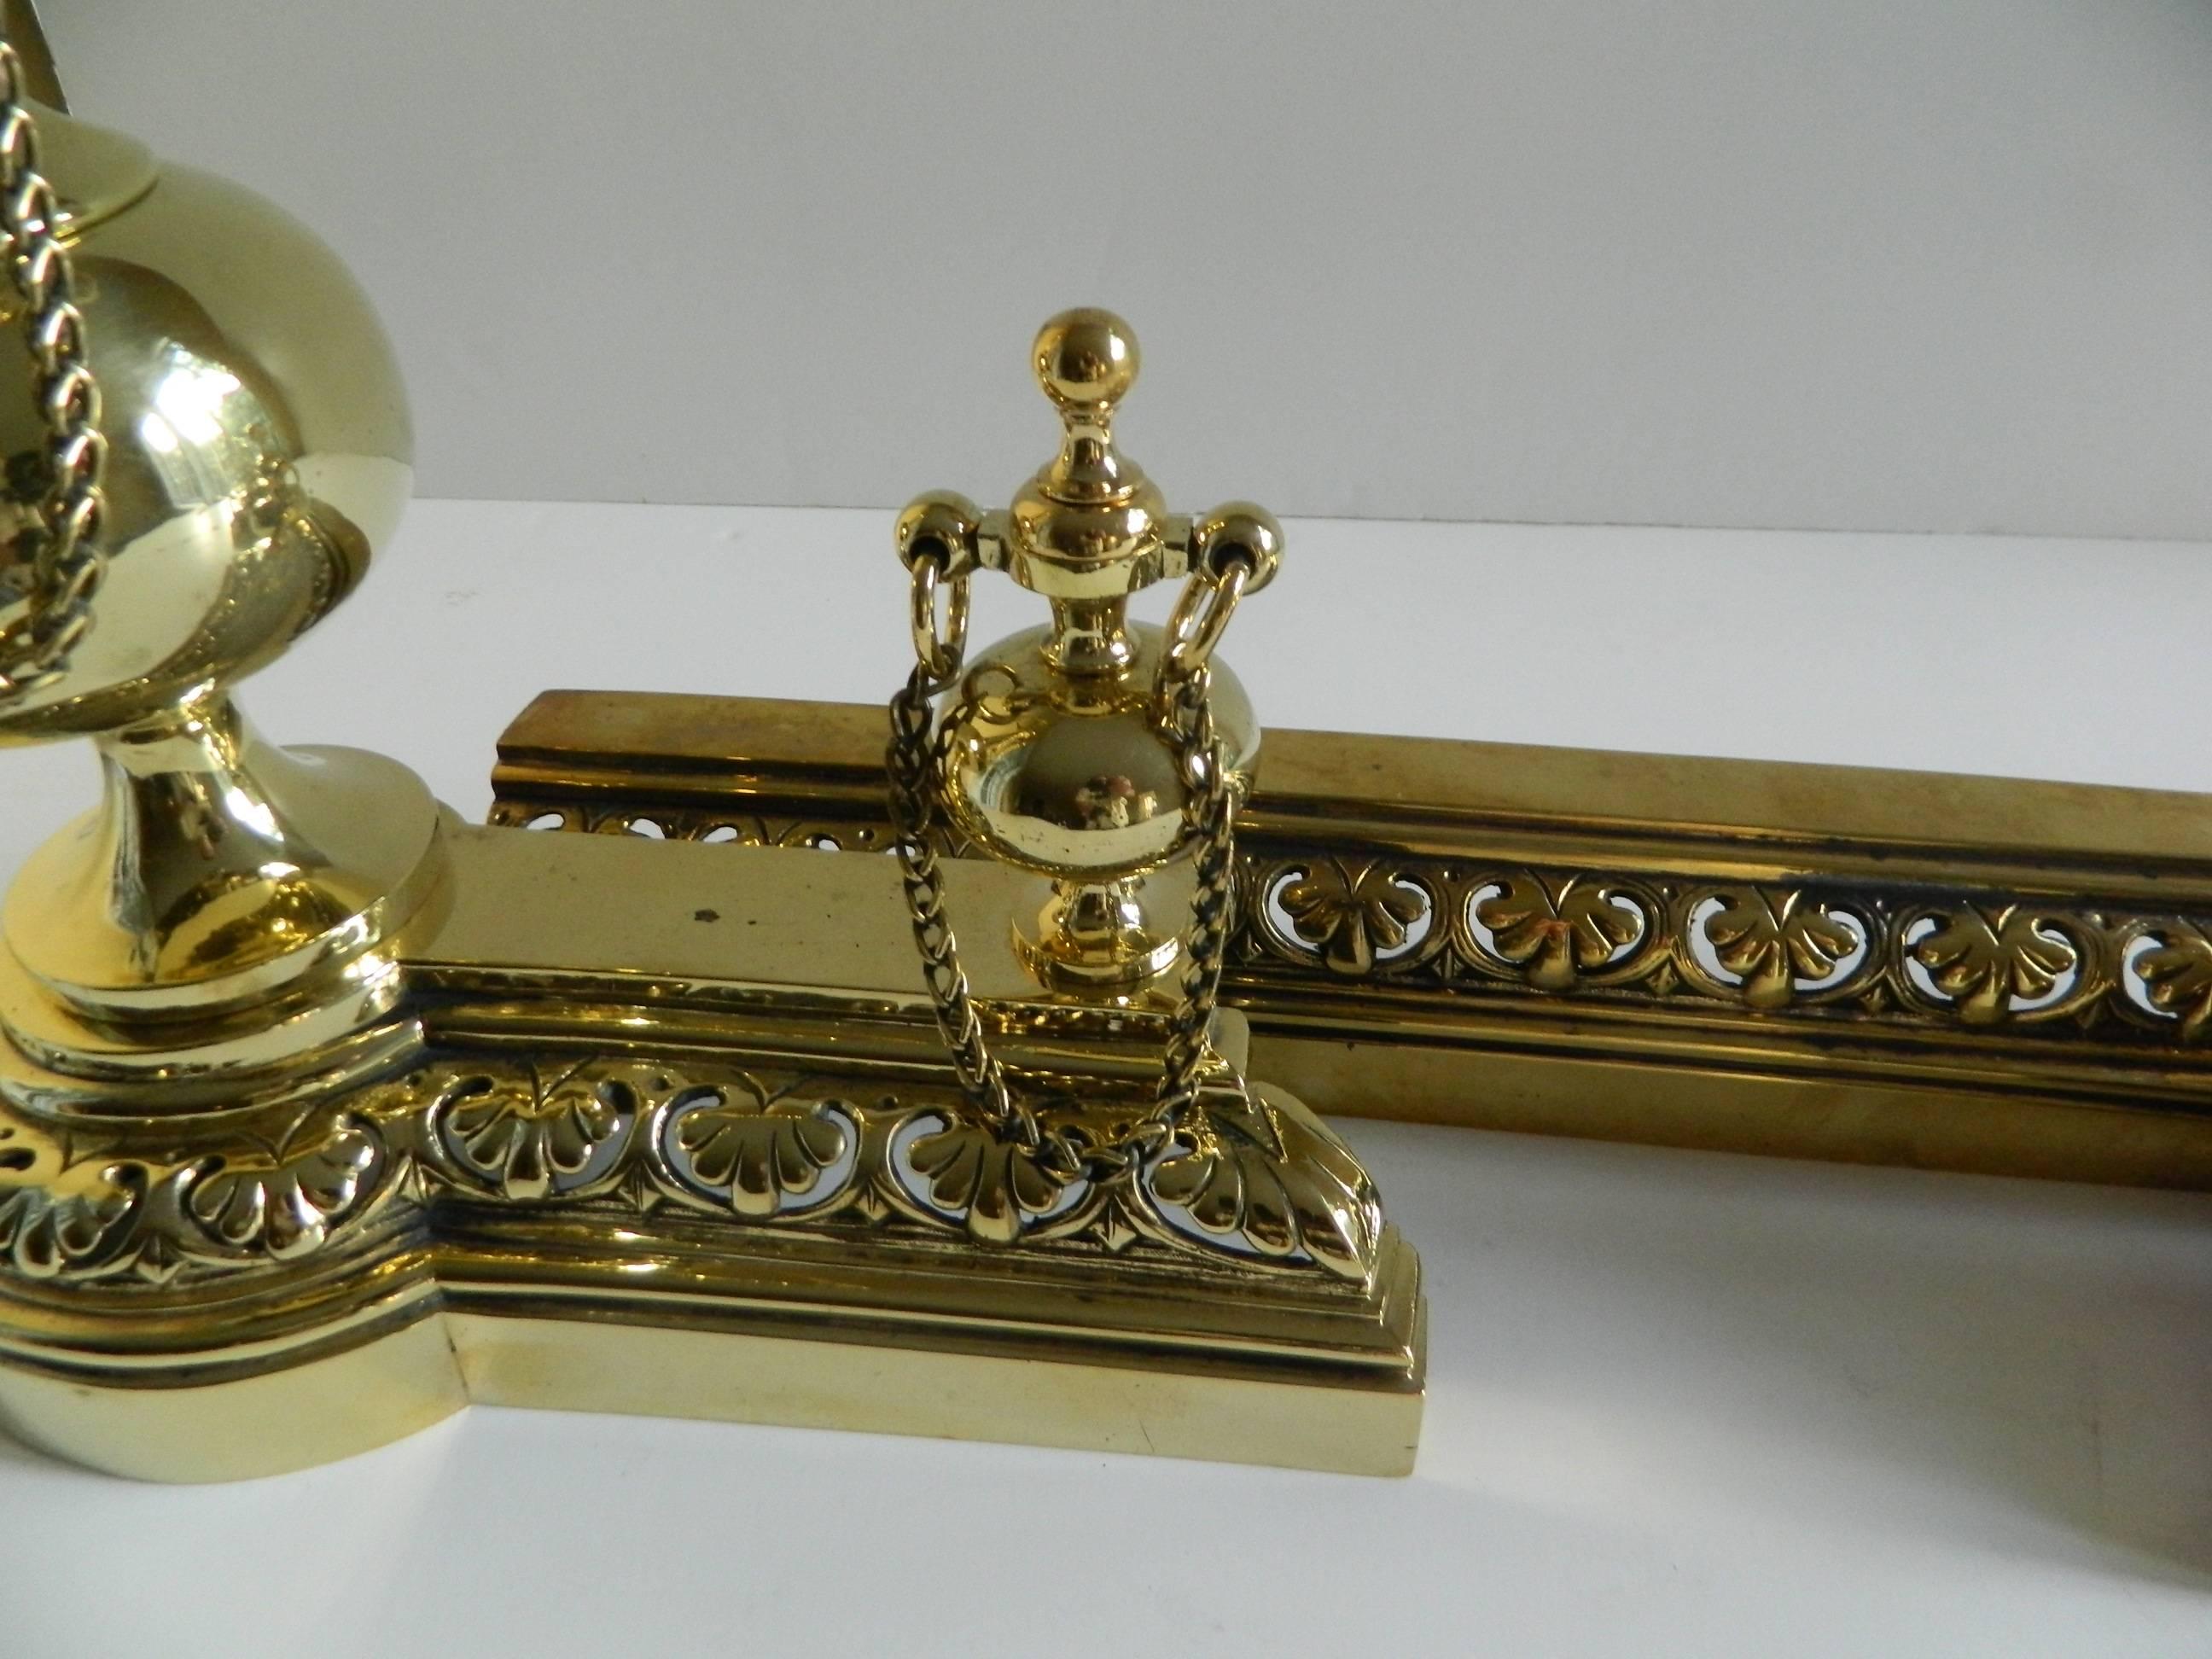 Pair of Polished Brass Chenets or Andirons with Fender, 19th Century In Good Condition For Sale In Savannah, GA